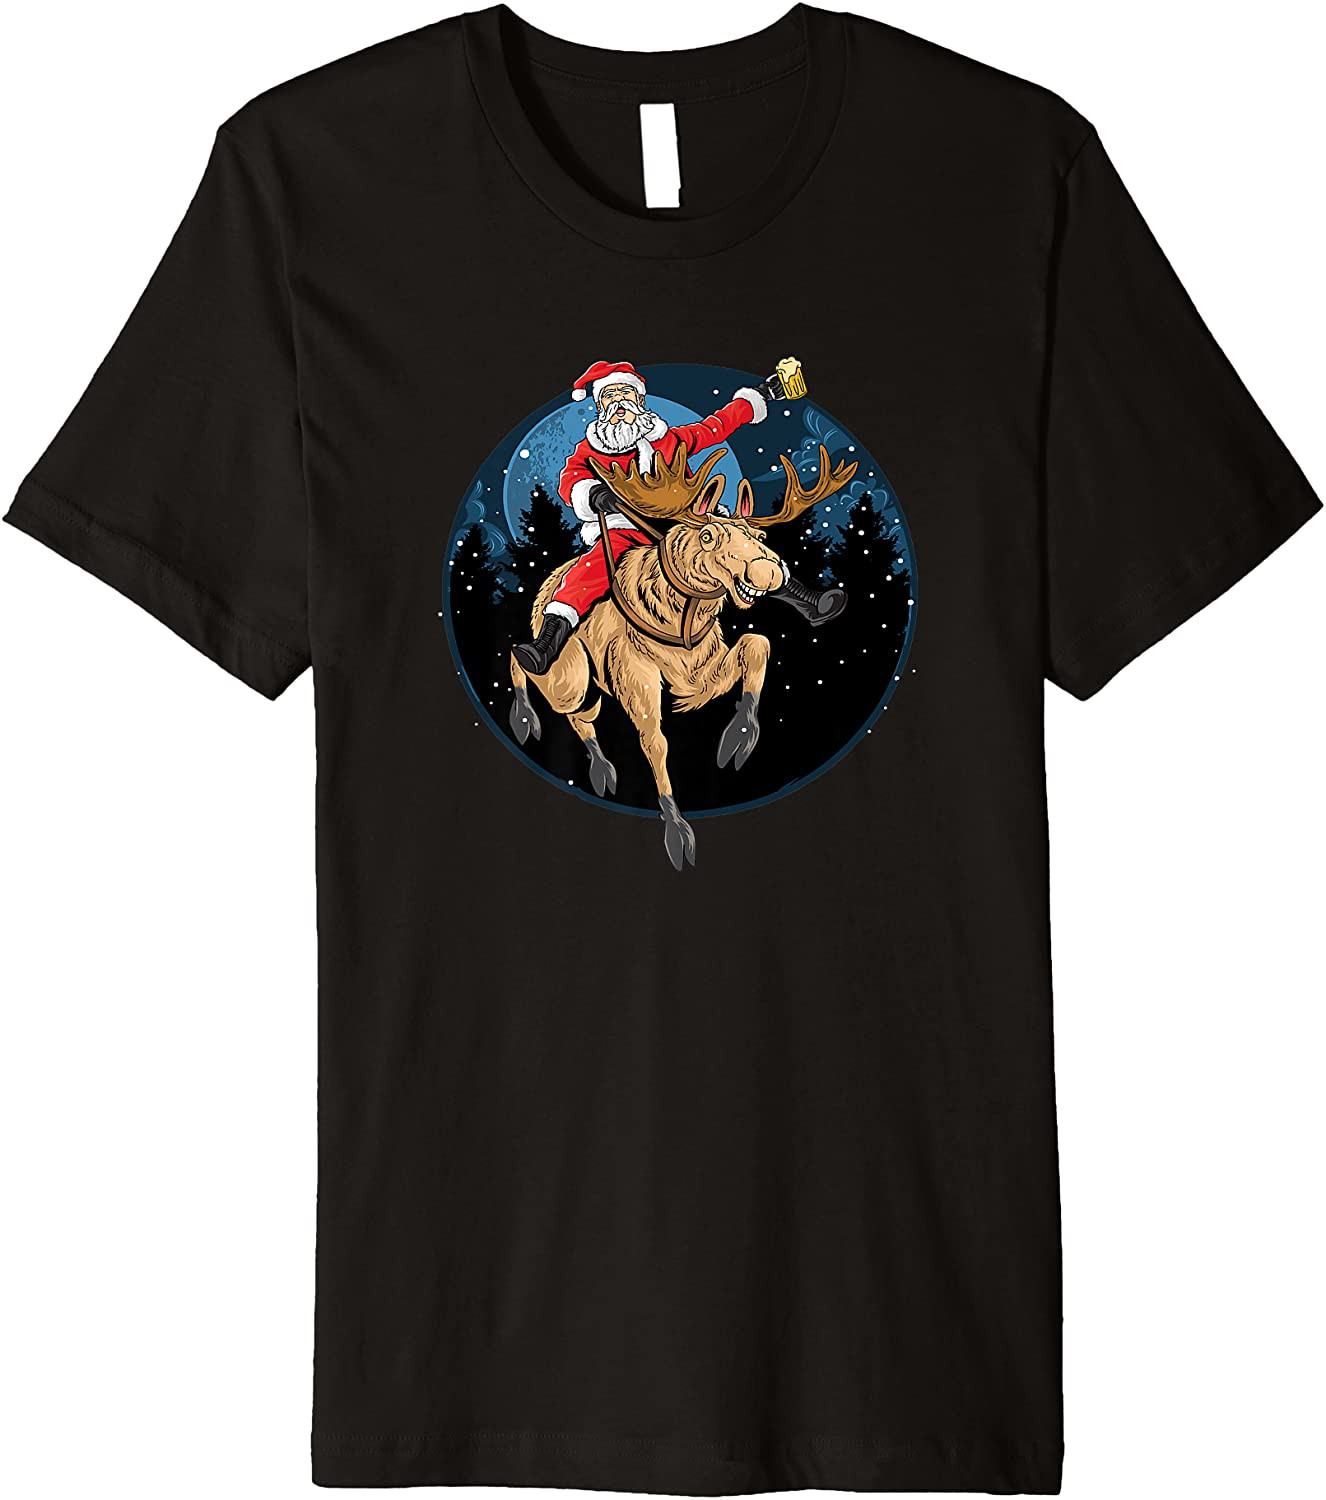 Santa Claus Drinking A Beer While Riding A Moose T-Shirt